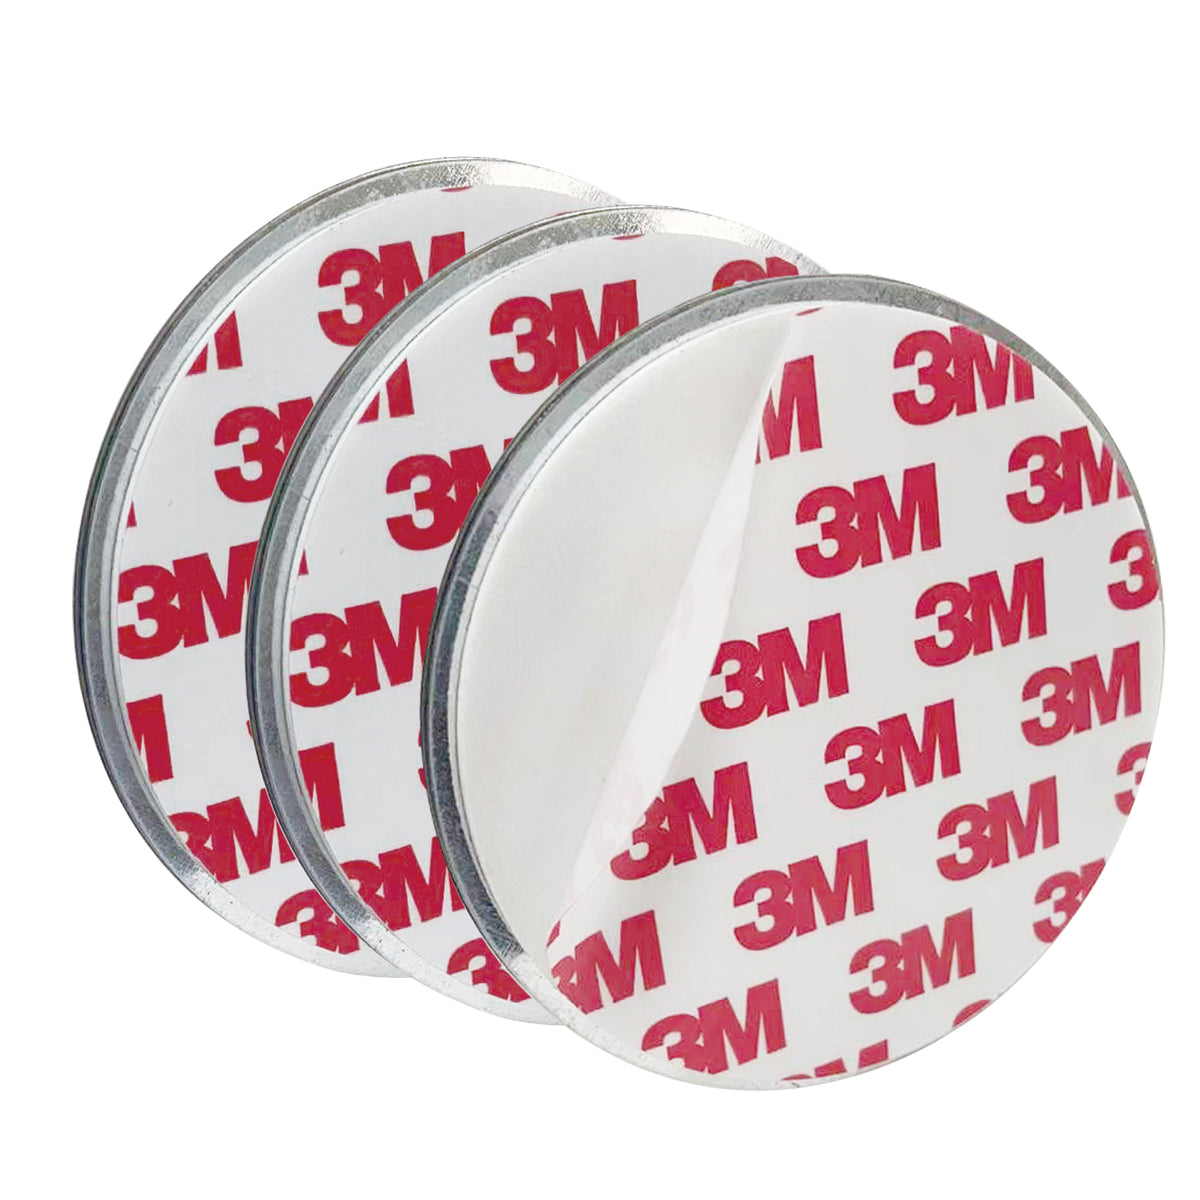 DVM-MMP-3: Set of 3 magnetic mounting pads DVM-MMP for smoke- and heat